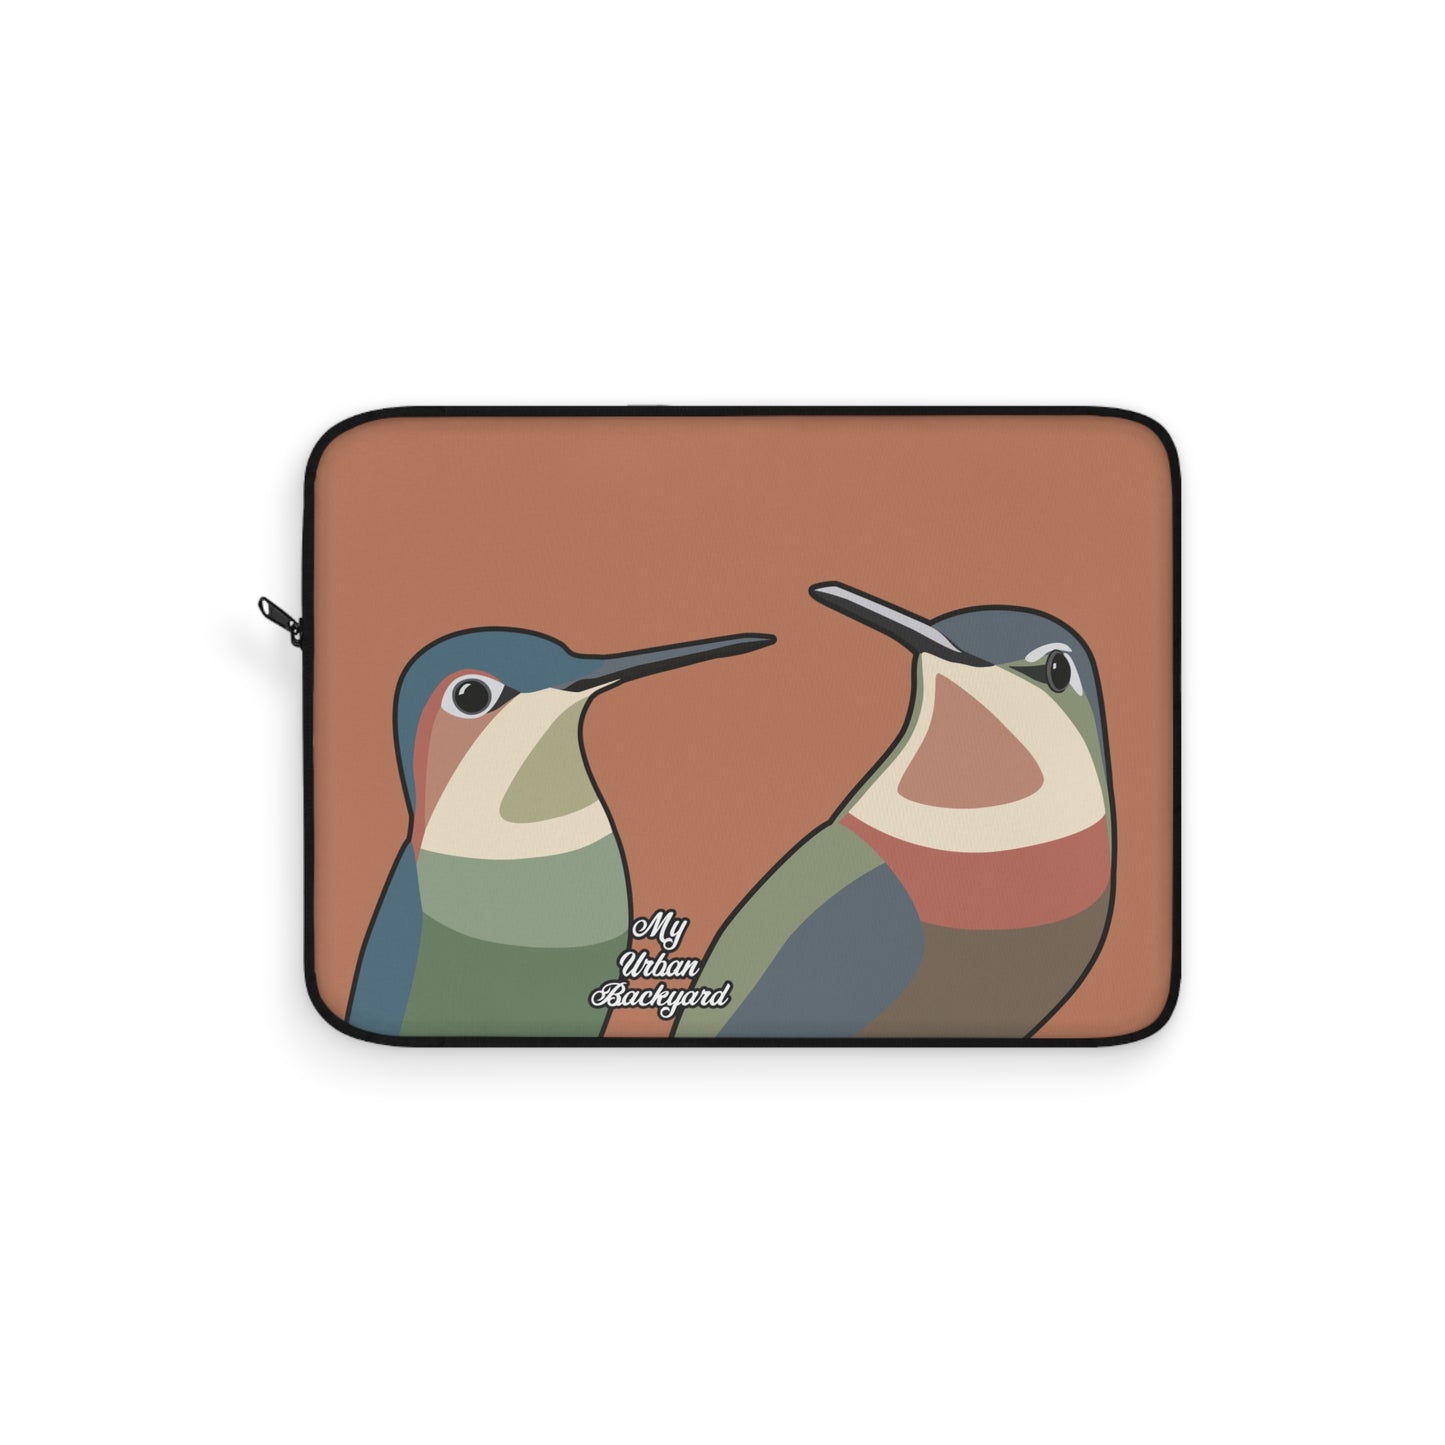 Hummingbirds on Terra Cotta, Laptop Carrying Case, Top Loading Sleeve for School or Work